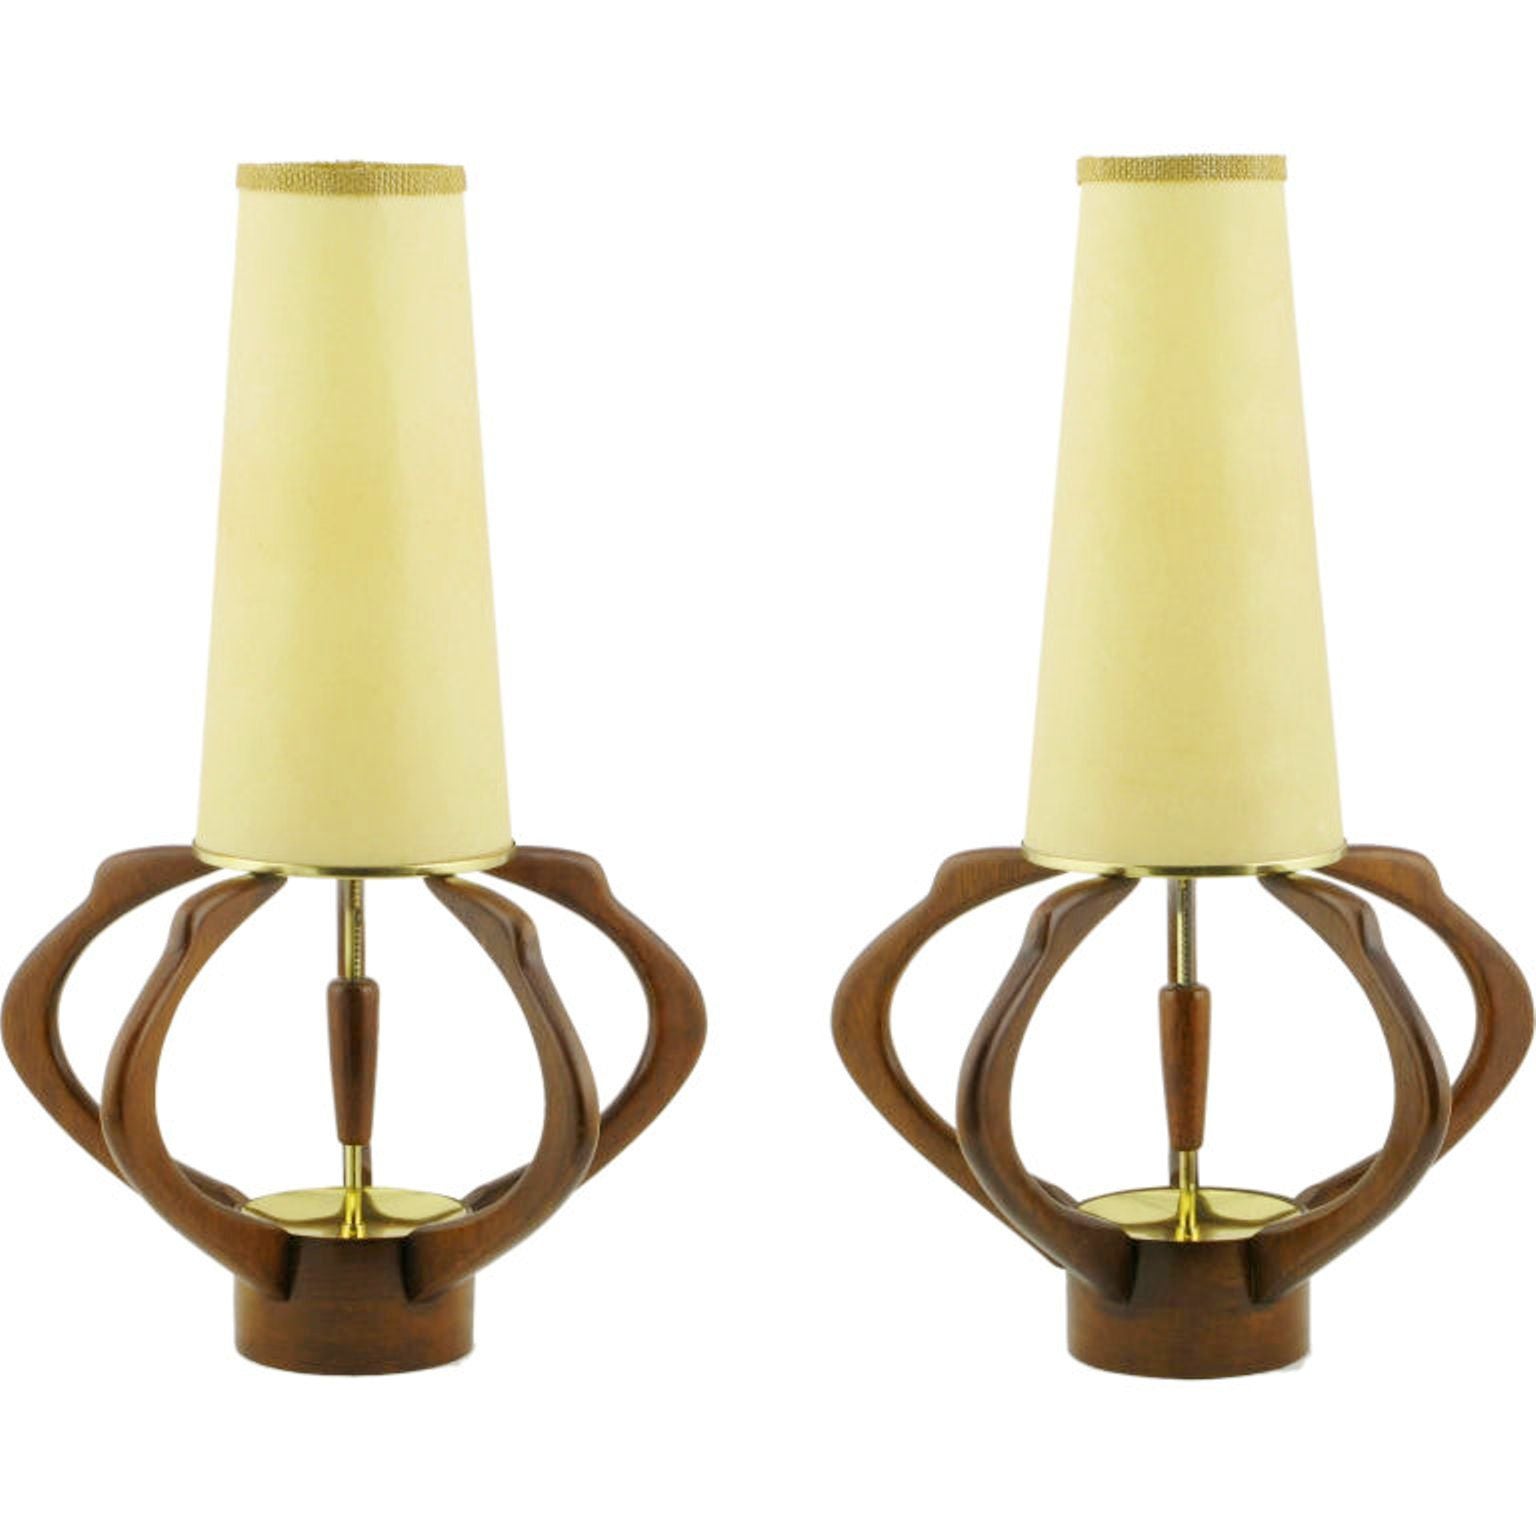 Pair of Sculptural Teak and Brass Melon-Form Table Lamps